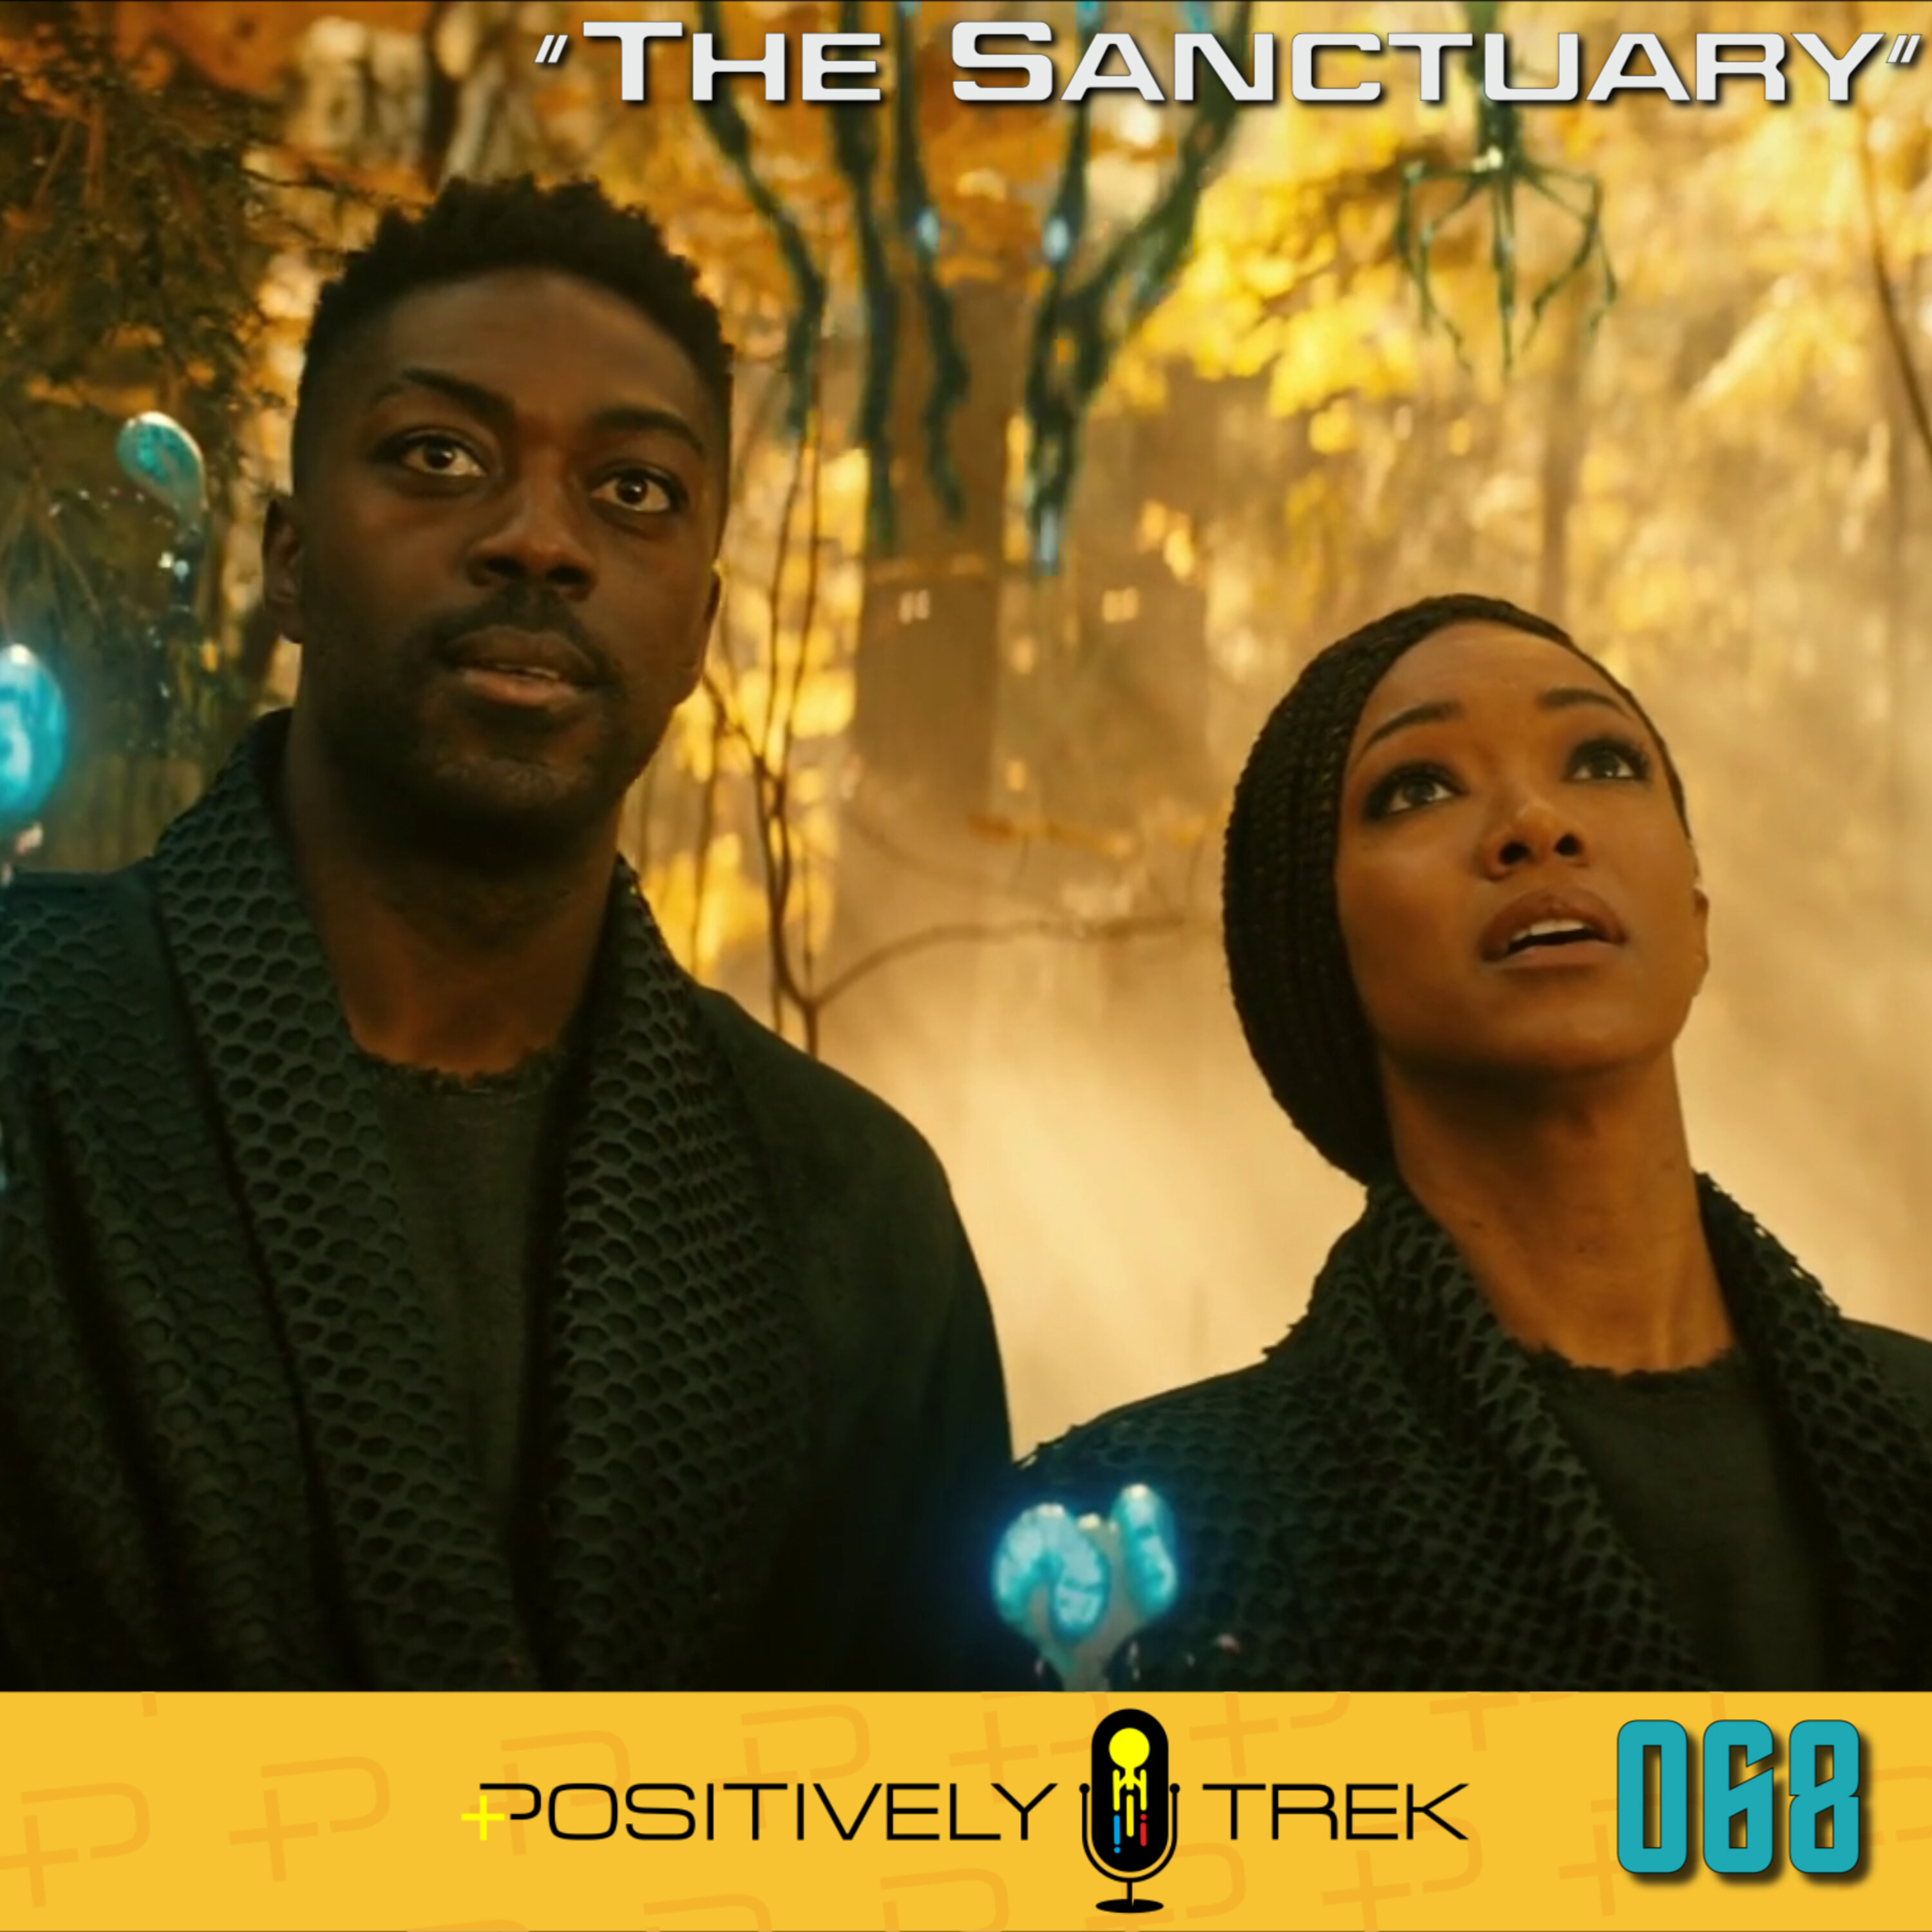 Discovery Review: “The Sanctuary” (3.08)